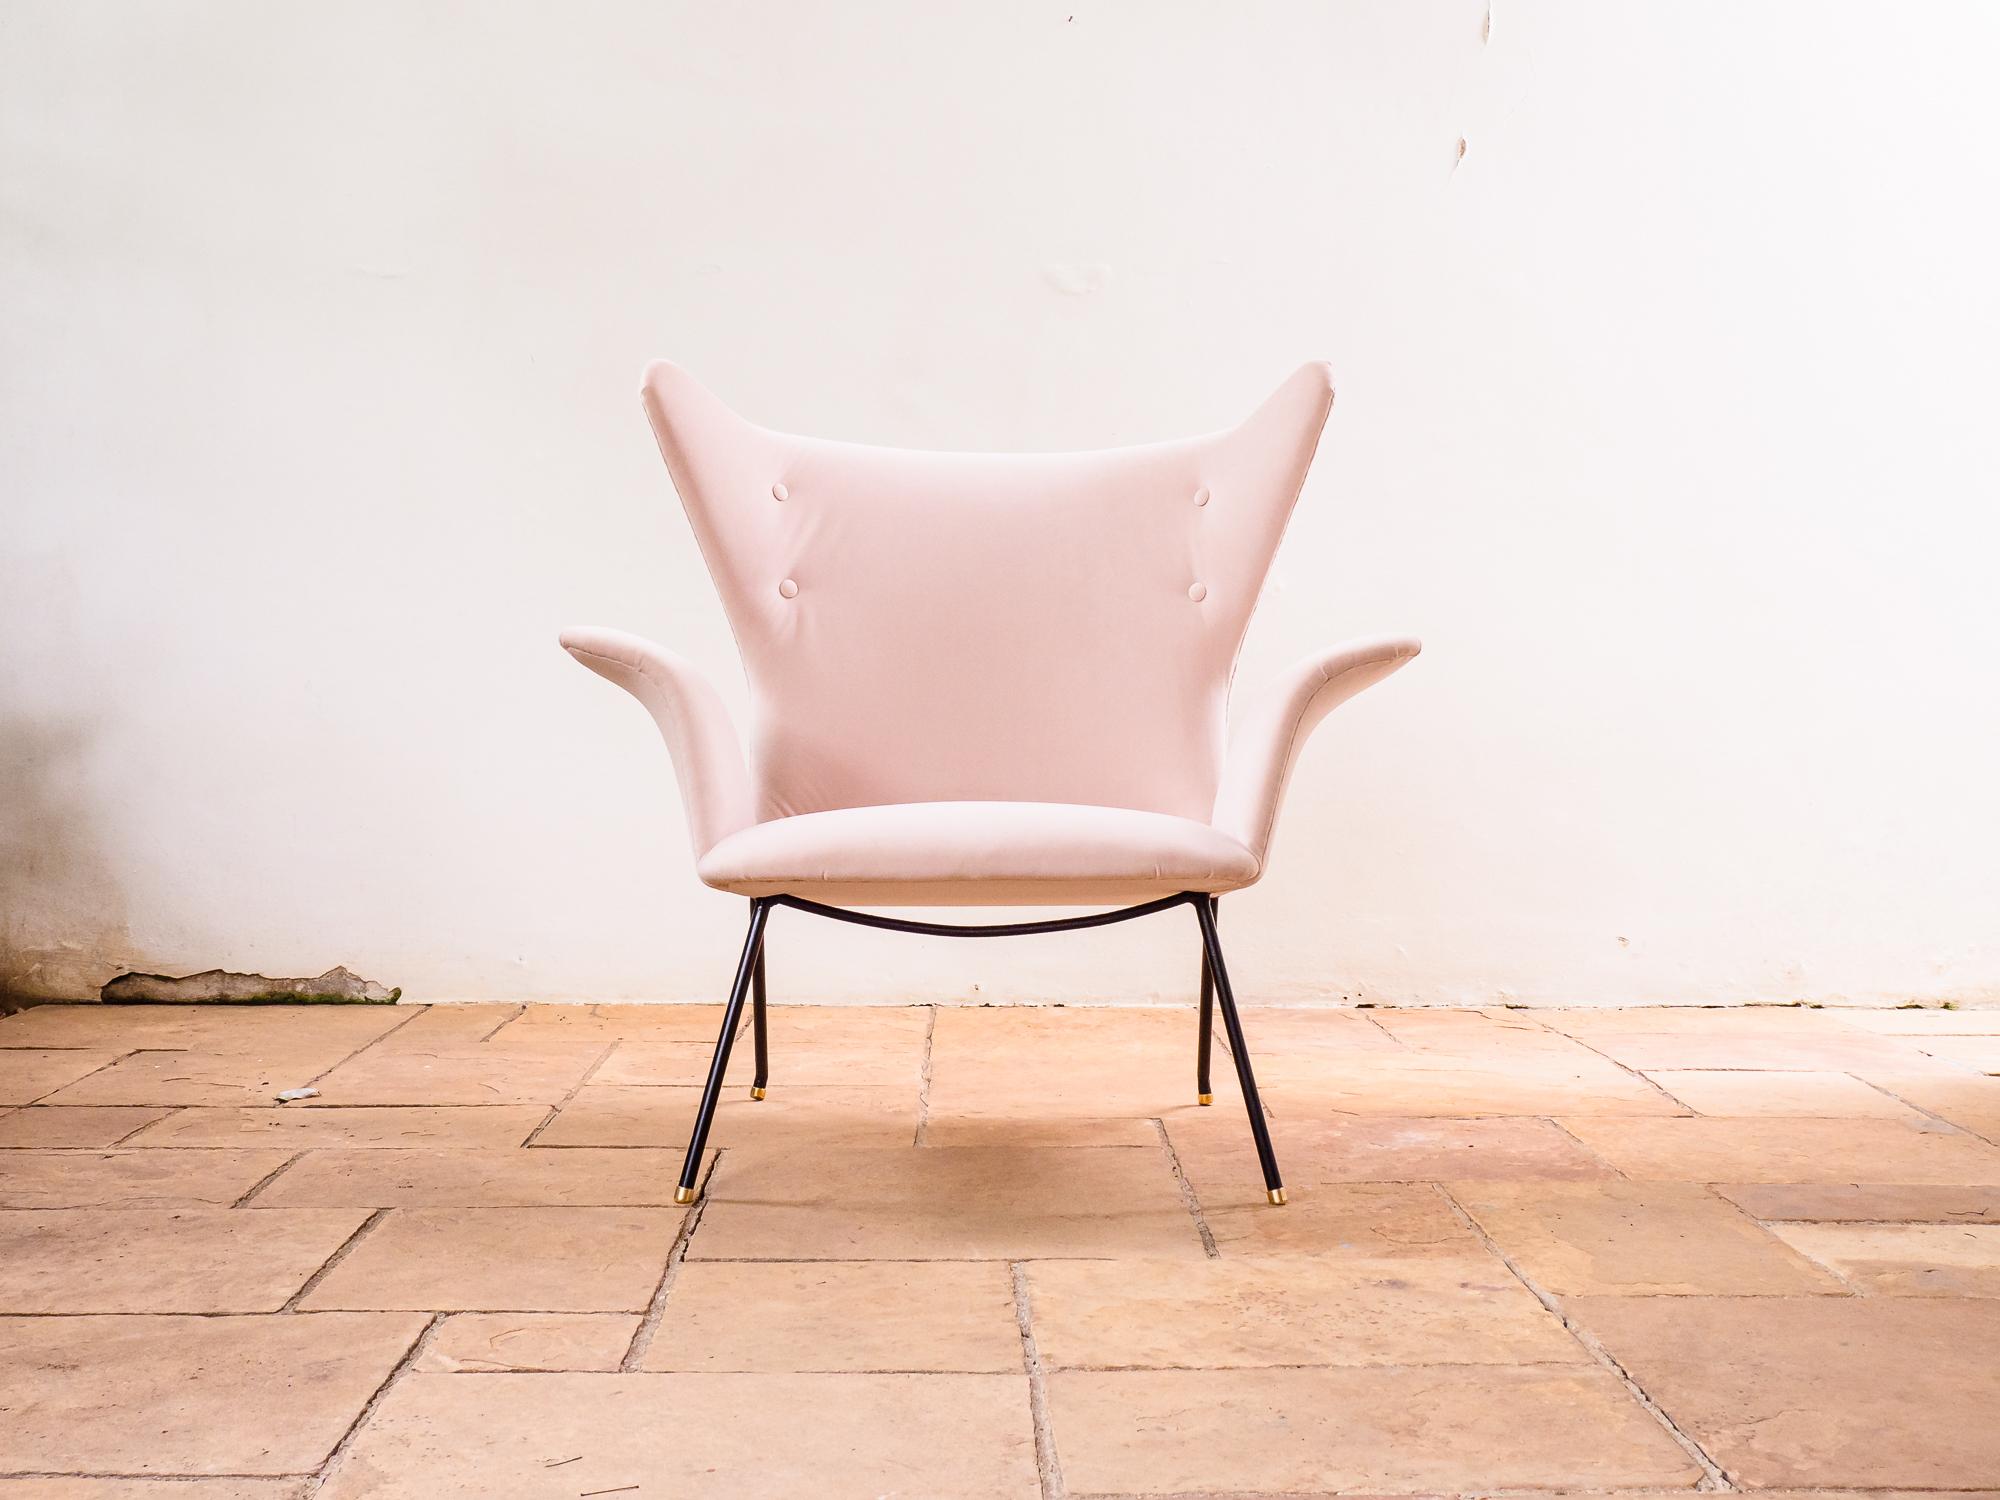 Rare and beautiful lounge chair, designed by Carlo Hauner for Móveis Artesanal in the early 1950s. 

Sharing some particularities with other prototypical designs from his early days in Brazil, this chair is probably a one off or part of a very